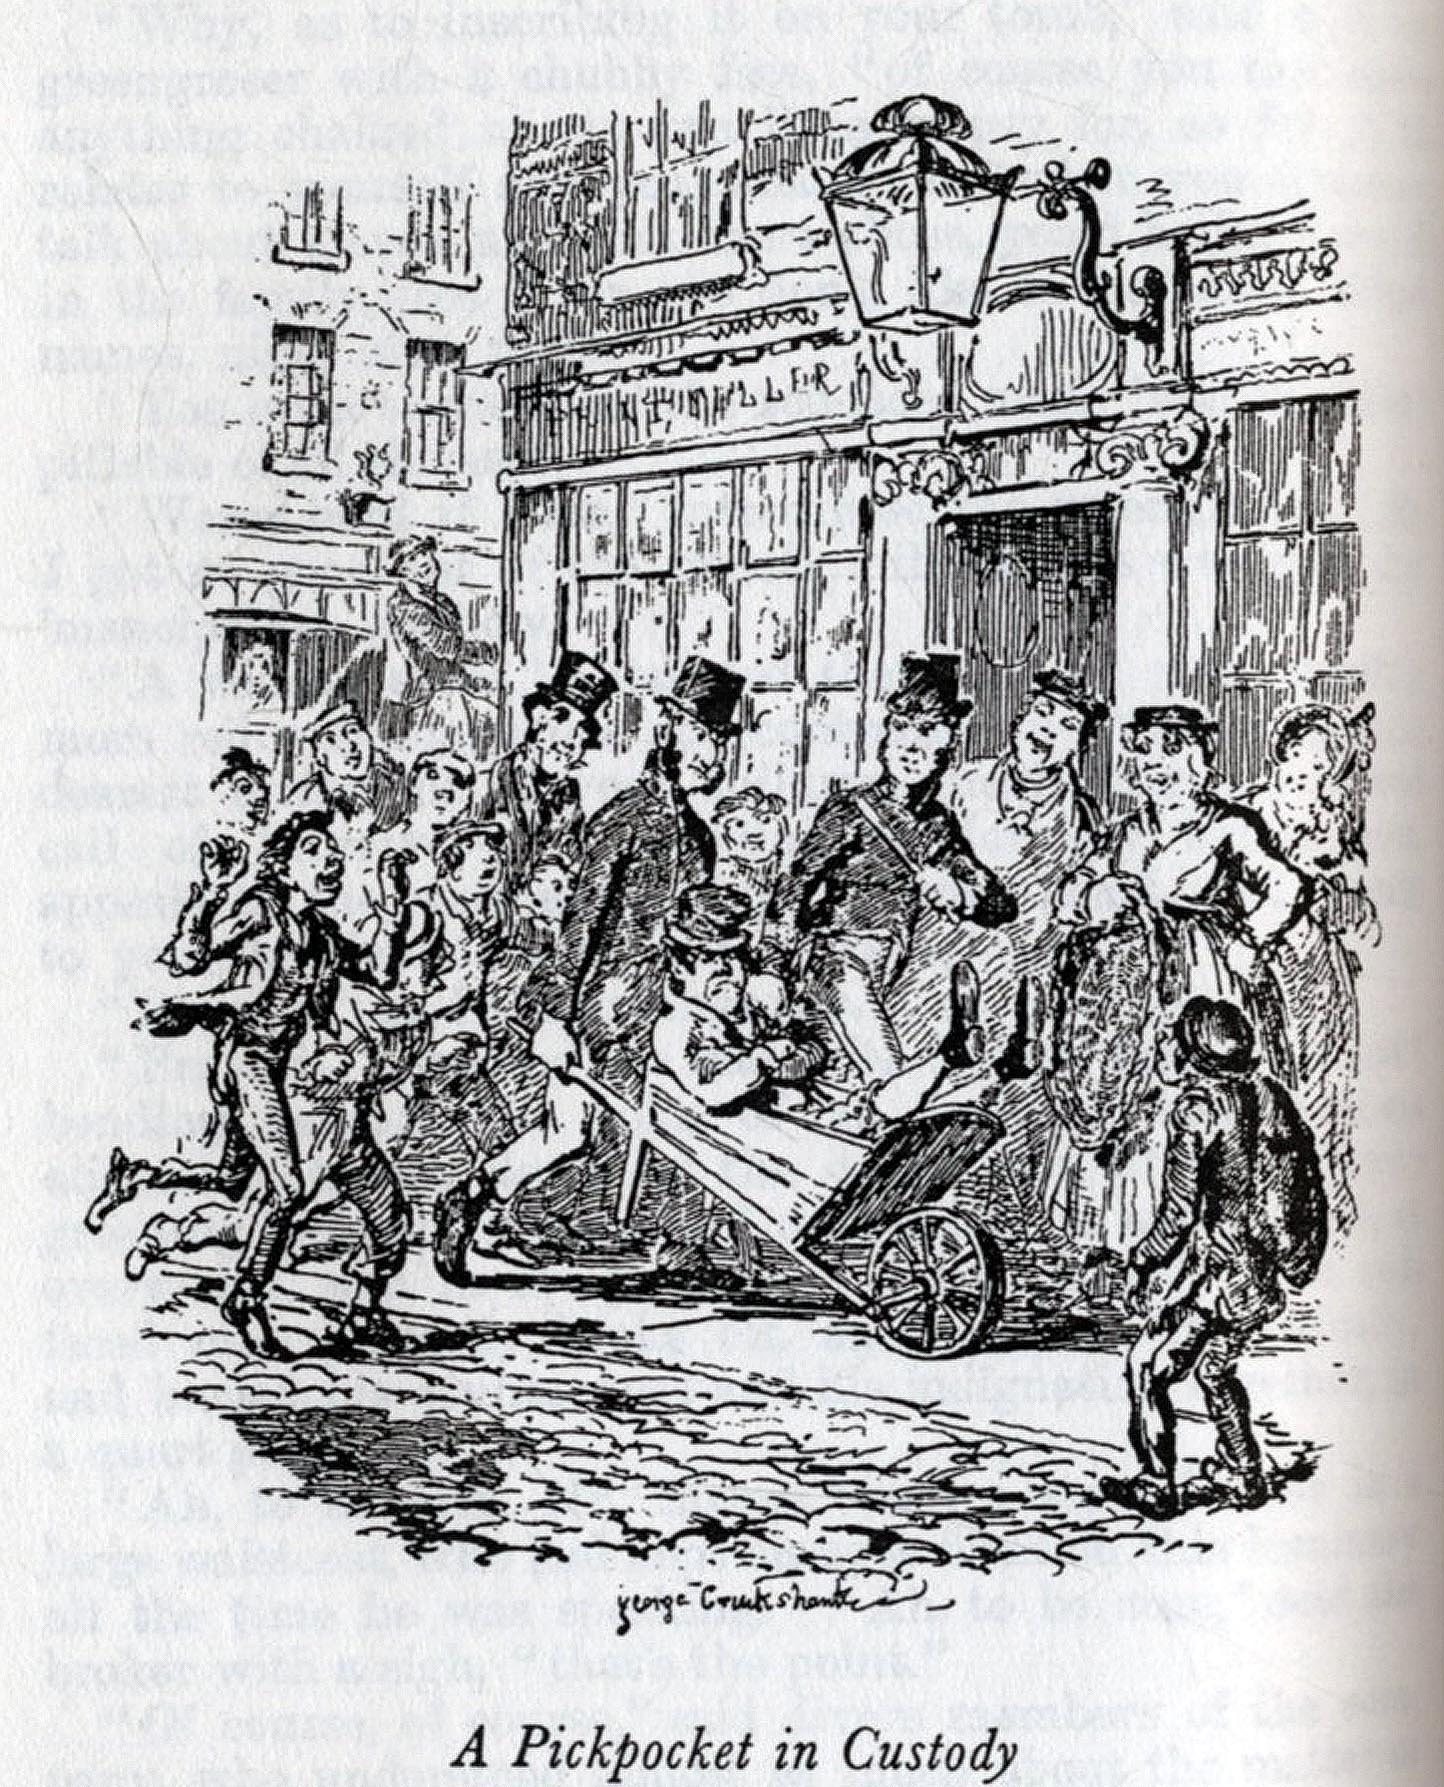 George Cruikshank, illustrations to Sketches by Boz, a selection, 1833-6